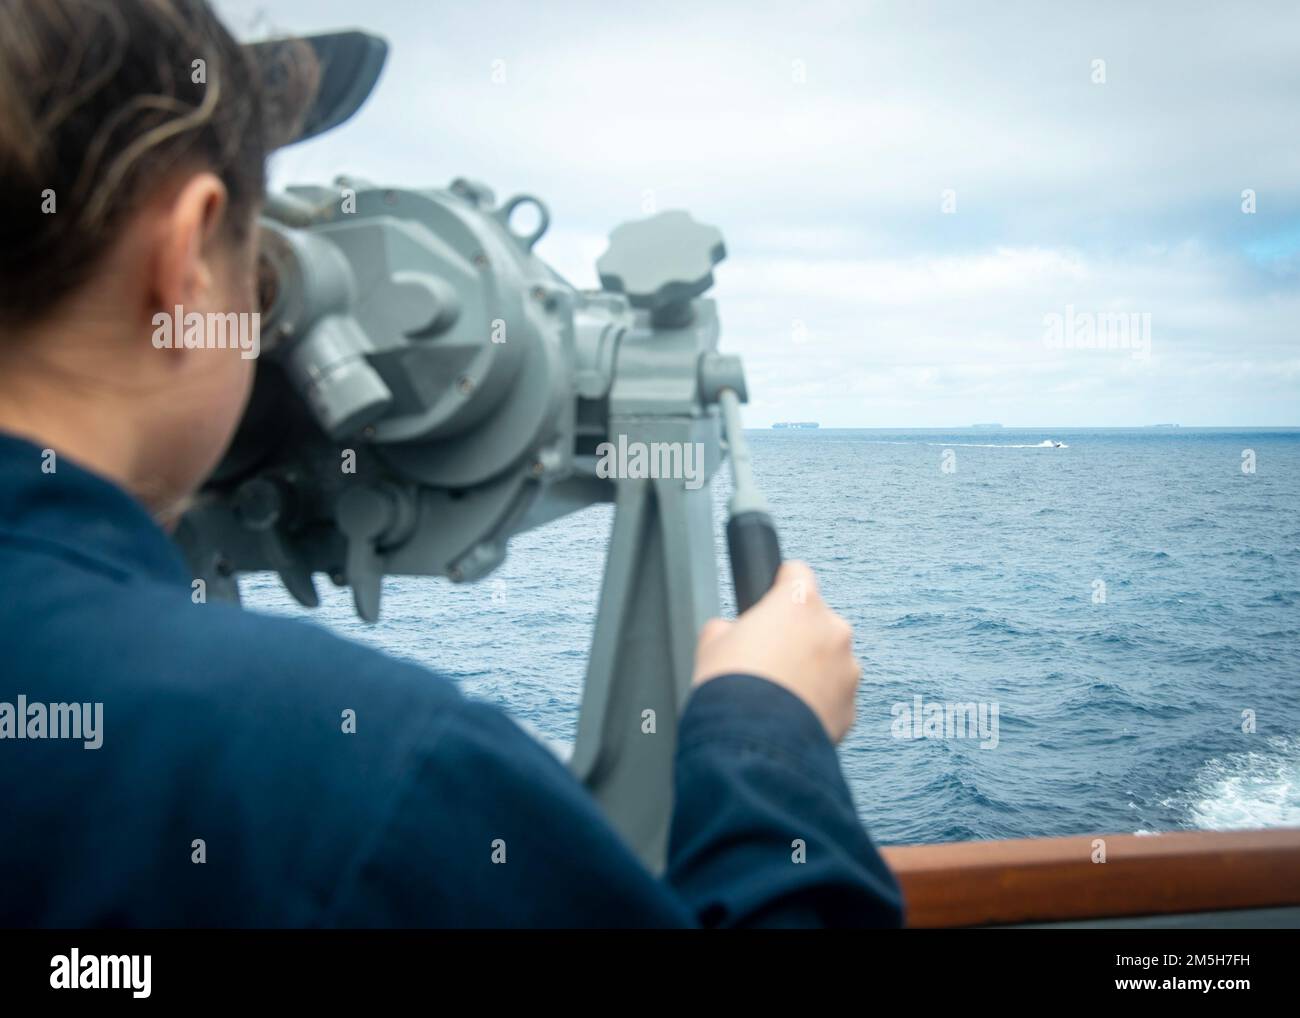 220317-N-FS190-1092 ATLANTIC OCEAN (March 17, 2022) Electronic's Technician 2nd Class Carola Lopezdiaz, assigned to the Arleigh Burke-class guided-missile destroyer USS Truxtun (DDG 103), utilizes the ship's binoculars during a simulated strait transit exercise for Task Force Exercise (TFEX), Mar.ch 17, 2022. TFEX is a scenario driven exercise that serves as certification for independent deploying ships and is designated to test mission readiness and performance in integrated operations. Truxtun is underway for Carrier Strike Group (CSG) 4 training evolutions. Stock Photo